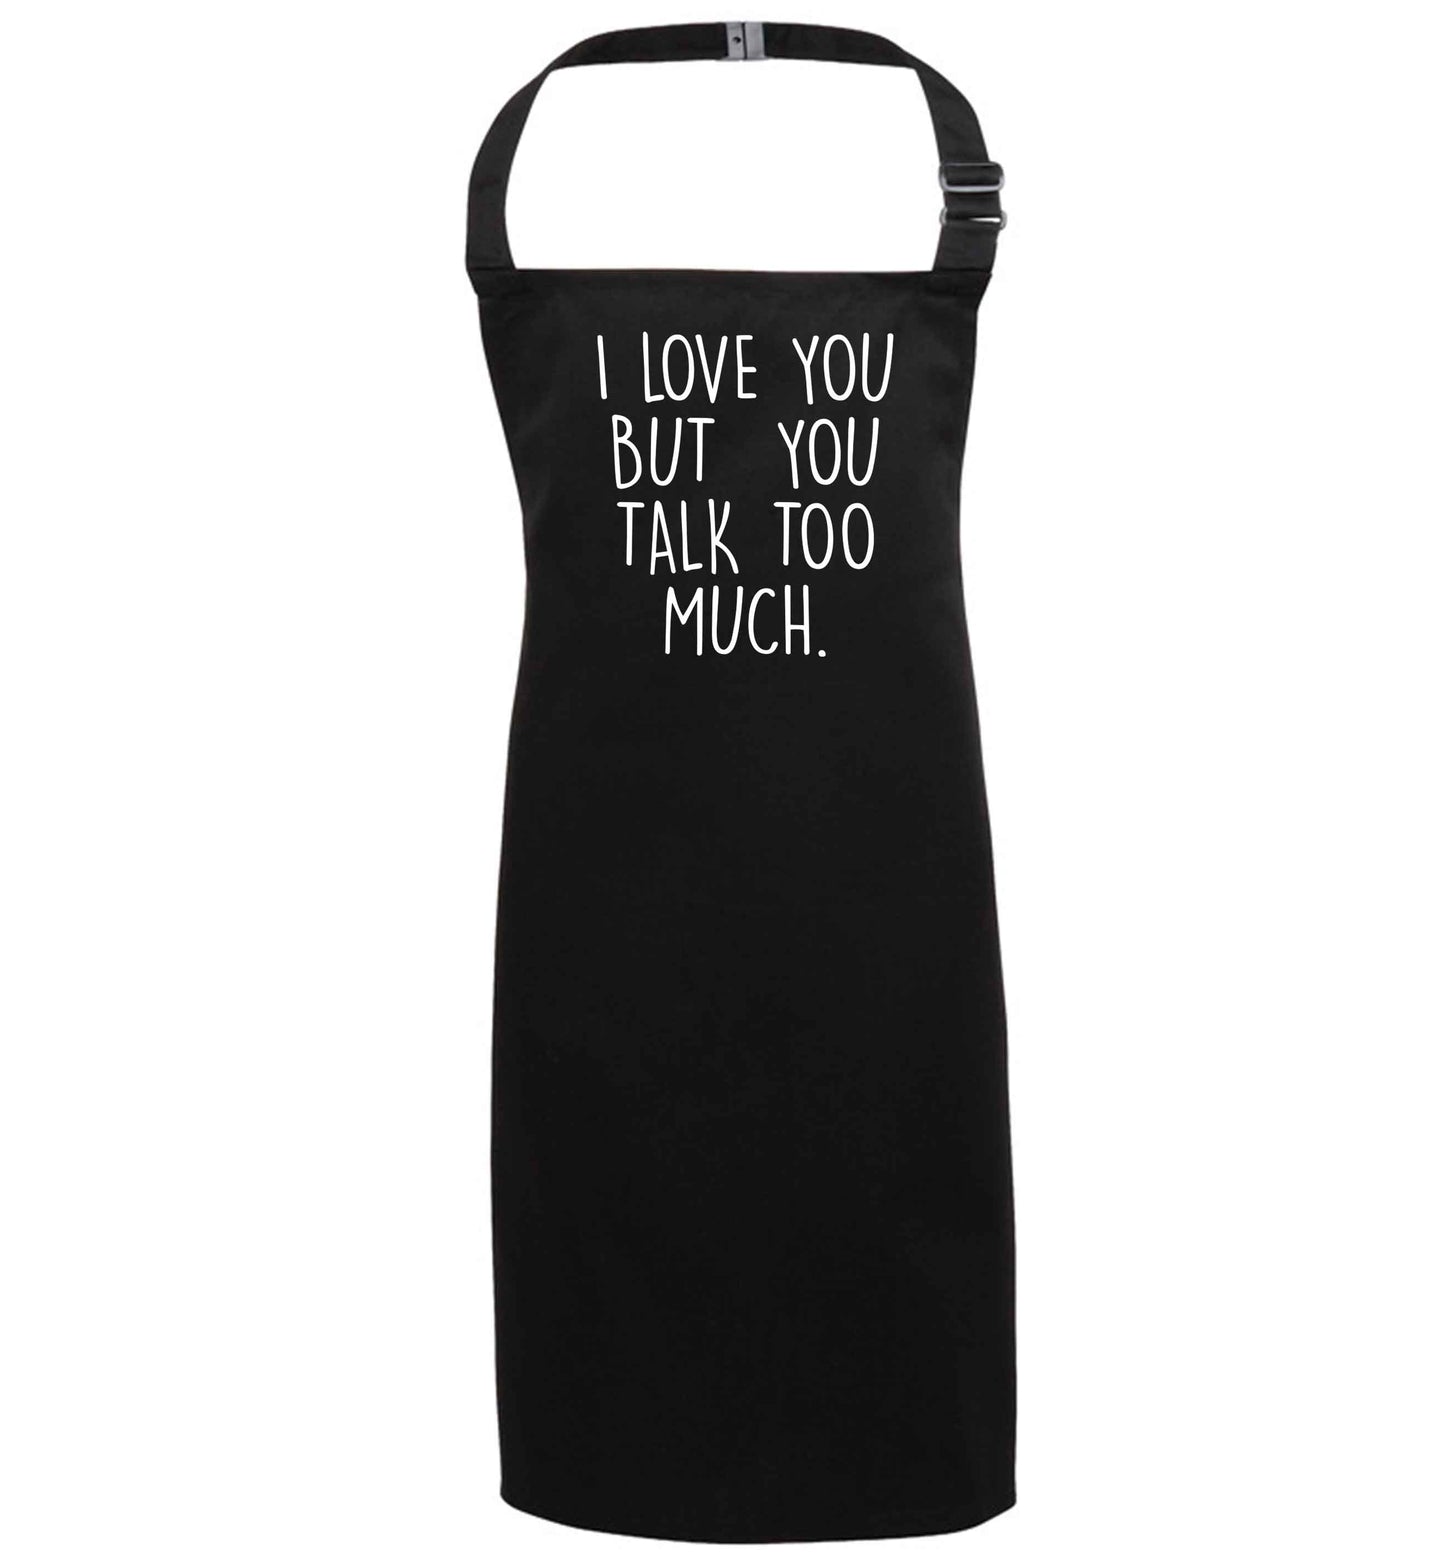 I love you but you talk too much black apron 7-10 years